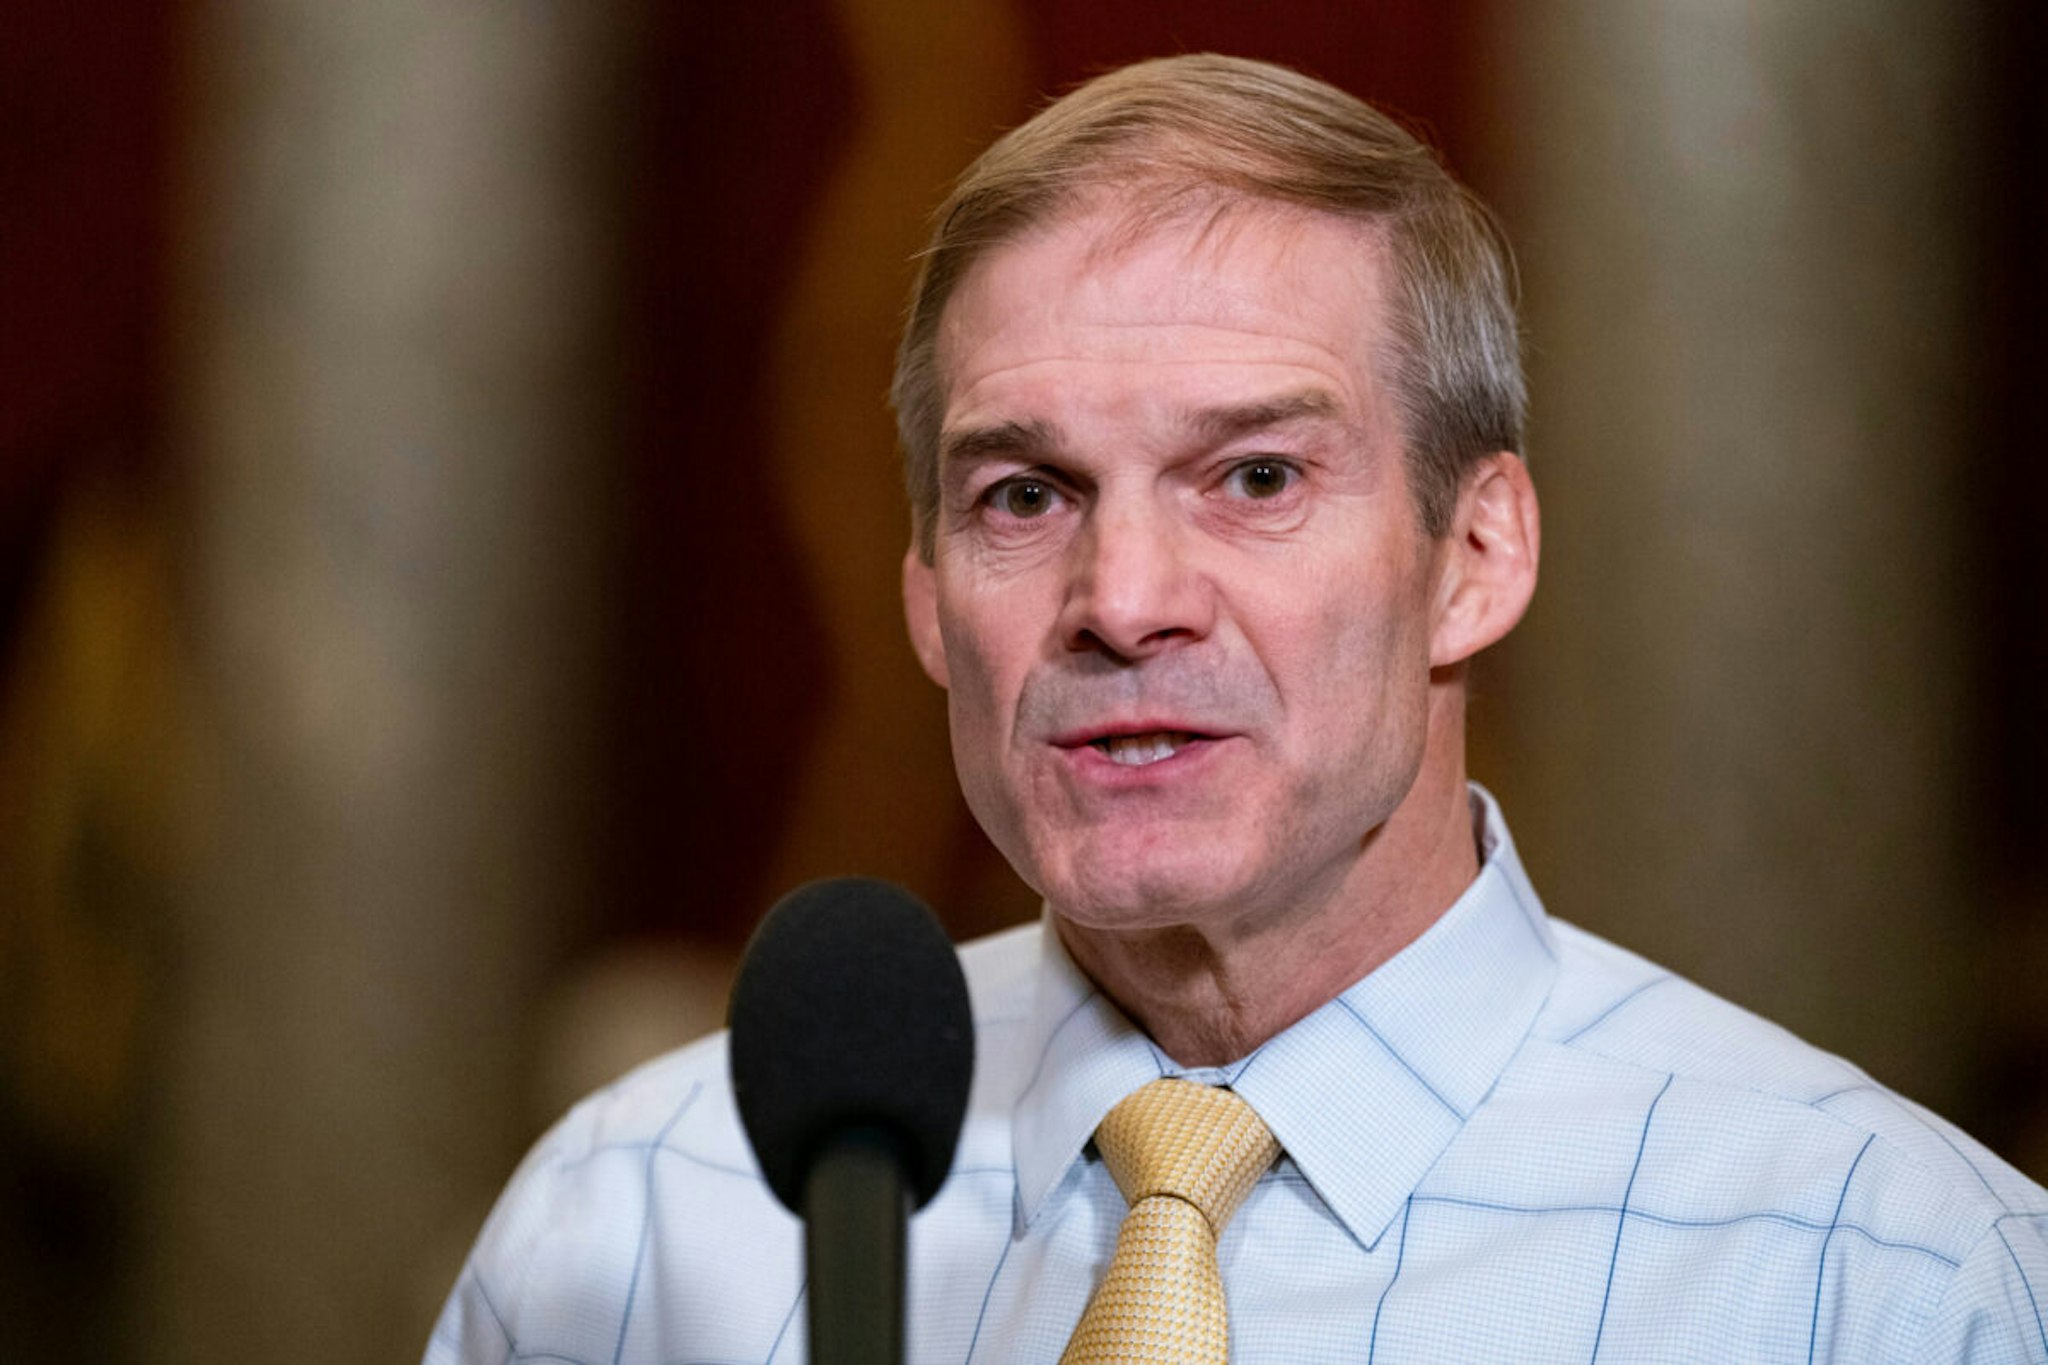 Representative Jim Jordan, a Republican from Ohio, speaks to members of the media following a vote to formally authorize an ongoing impeachment inquiry against President Joe Biden at the US Capitol in Washington, DC, US, on Wednesday, Dec. 13, 2023.